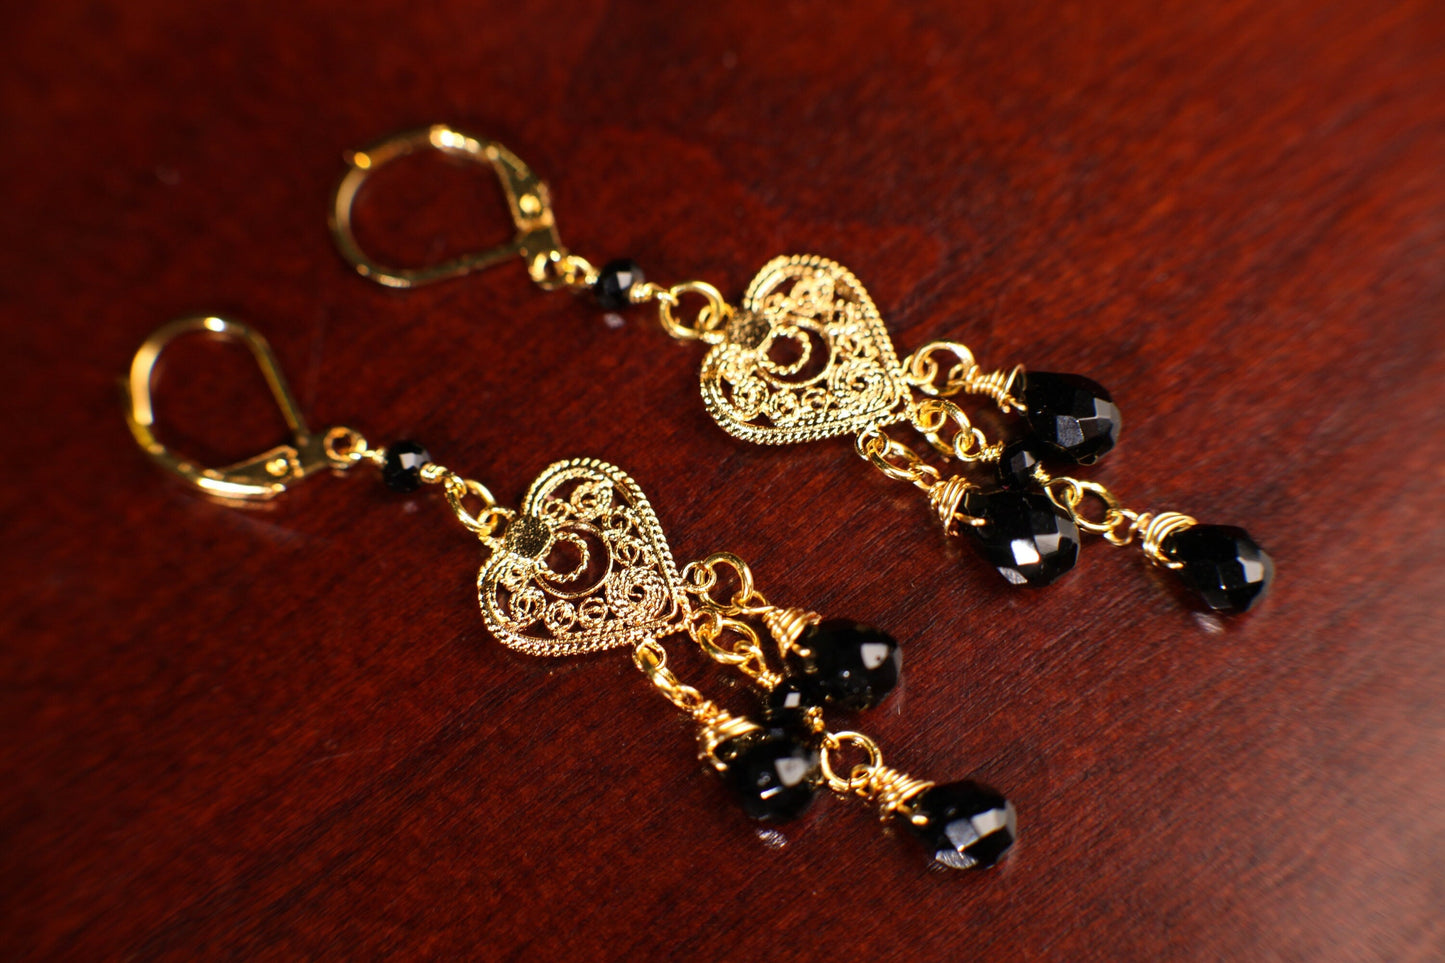 Natural Black Onyx Dangling Filigree Chandelier Heart, Faceted Onyx Spacers Wire Wrapped Gold Earrings, Handmade Gift for Her